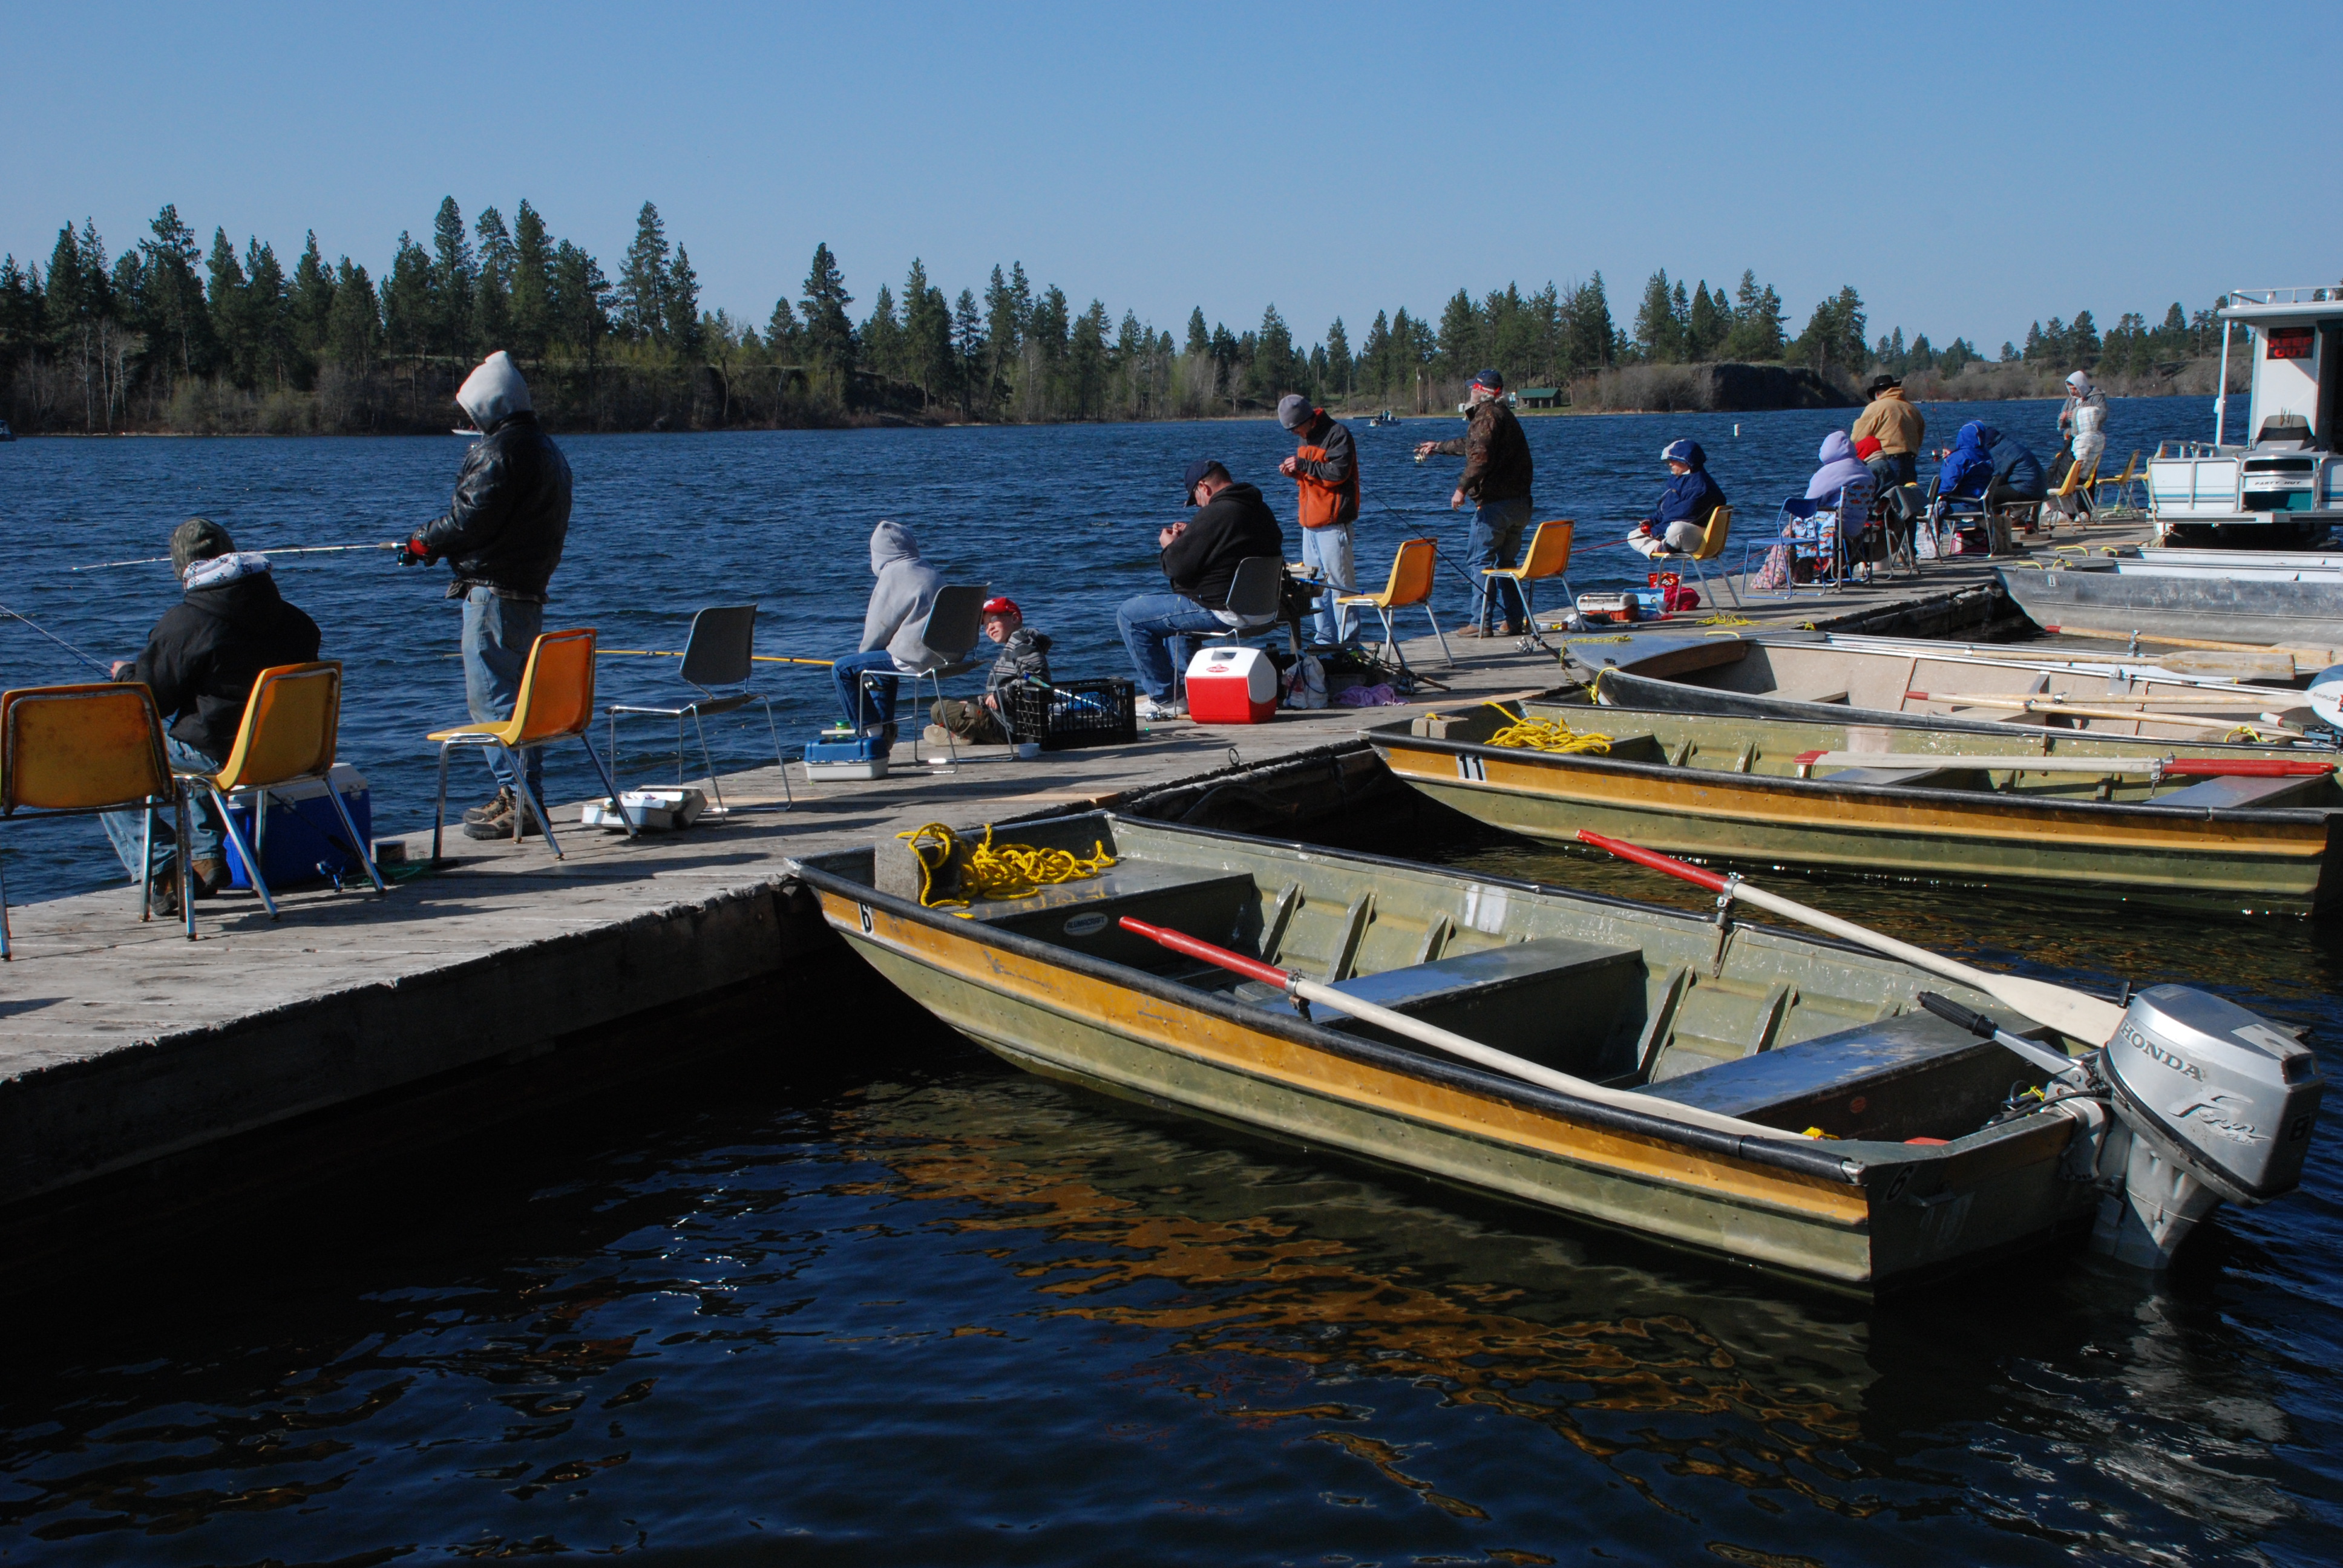 Where to rent fishing boats | The Spokesman-Review